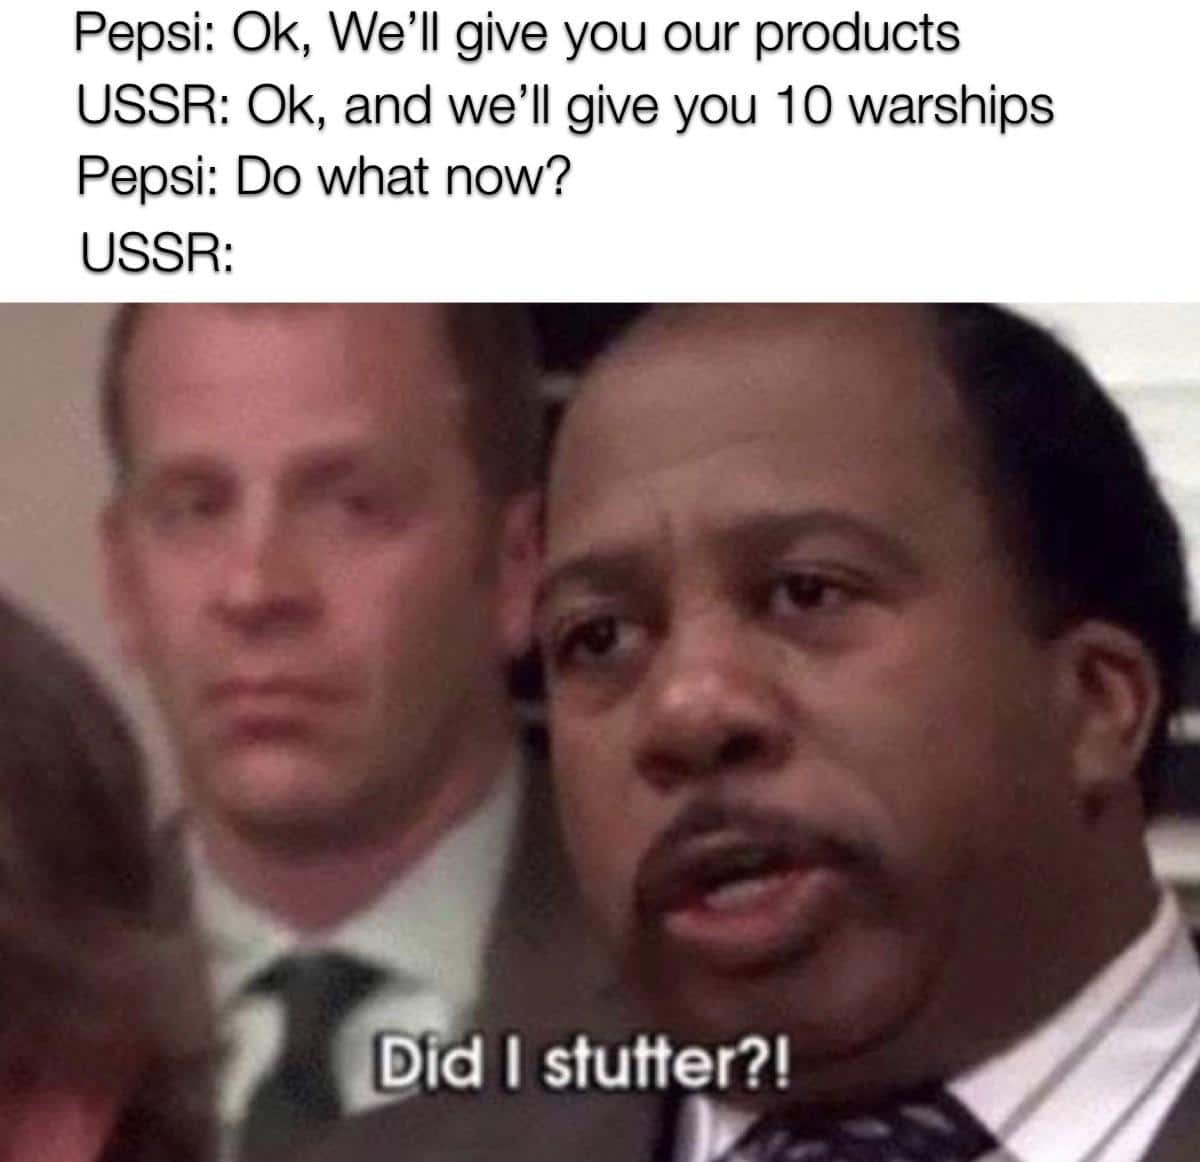 History, Pepsi, Gorbachev, Cola Wars History Memes History, Pepsi, Gorbachev, Cola Wars text: Pepsi: Ok, We'll give you our products USSR: Ok, and we'll give you 10 warships Pepsi: Do what now? USSR: Dd I stutter?! 